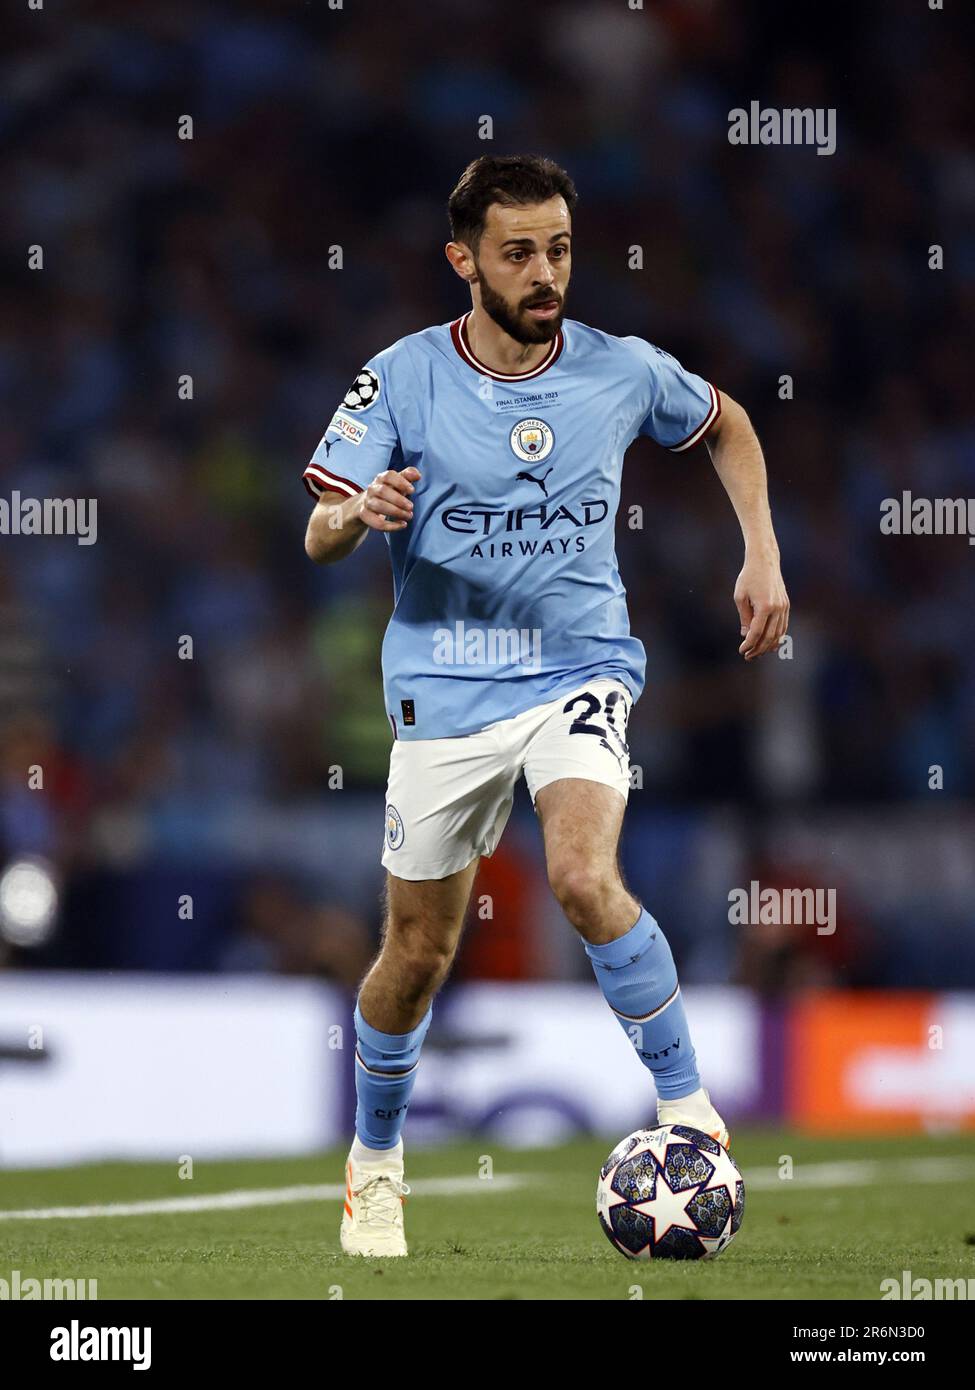 ISTANBUL - Bernardo Silva of Manchester City FC during the UEFA Champions League Final between Manchester City FC and FC Inter Milan at Ataturk Olympic Stadium on June 10, 2023 in Istanbul, Turkey. AP | Dutch Height | MAURICE OF STONE Stock Photo